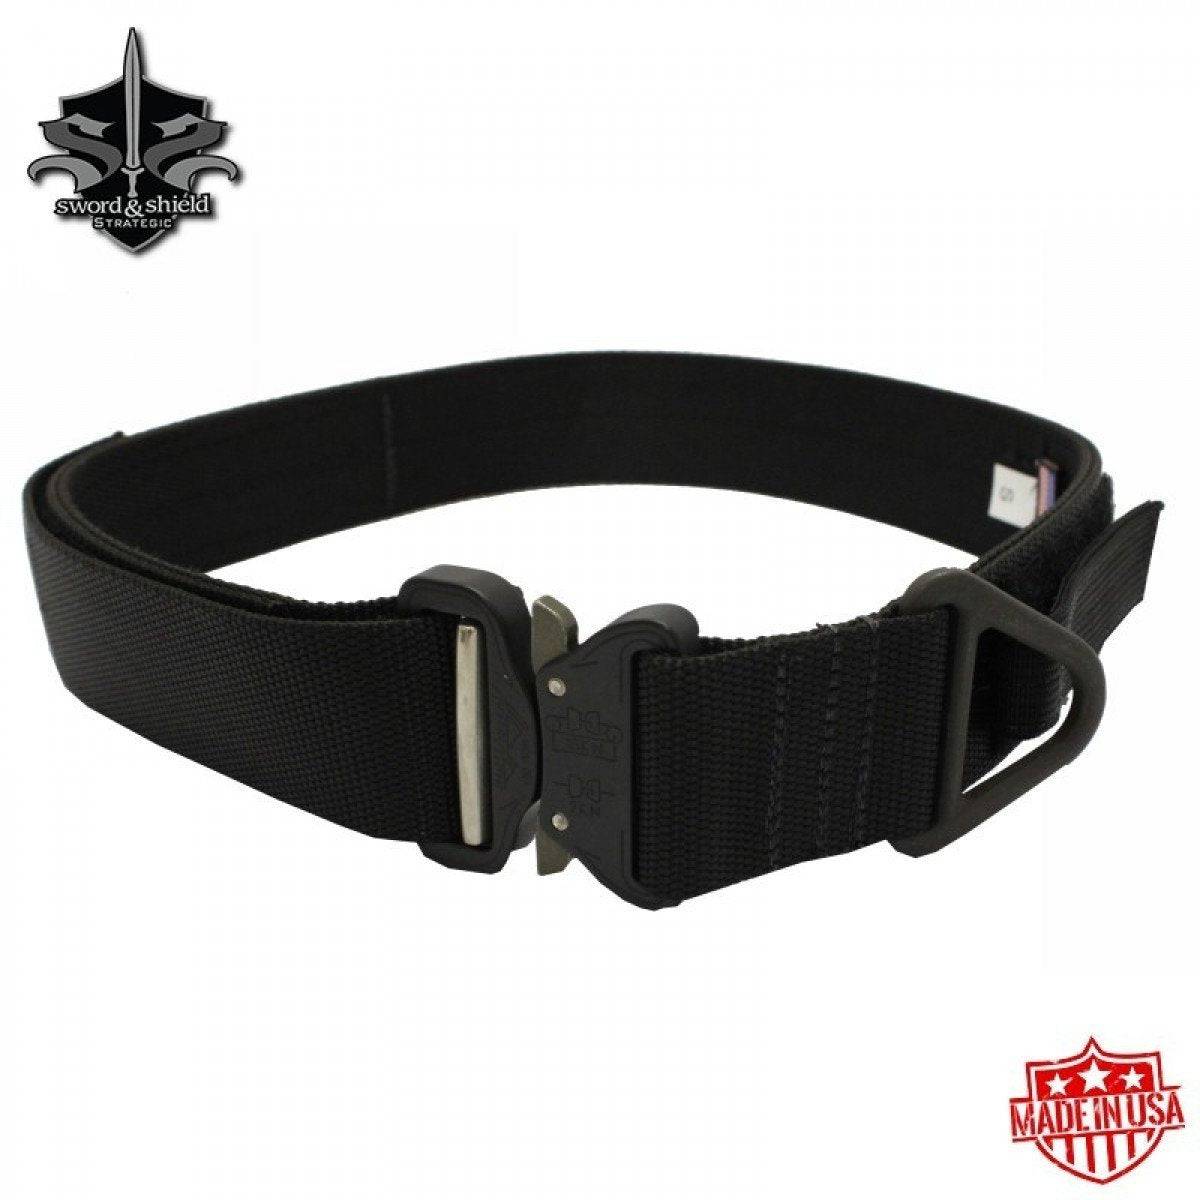 New - Ares Gear Ranger Belt with Cobra Buckle - Black - Size XS or S